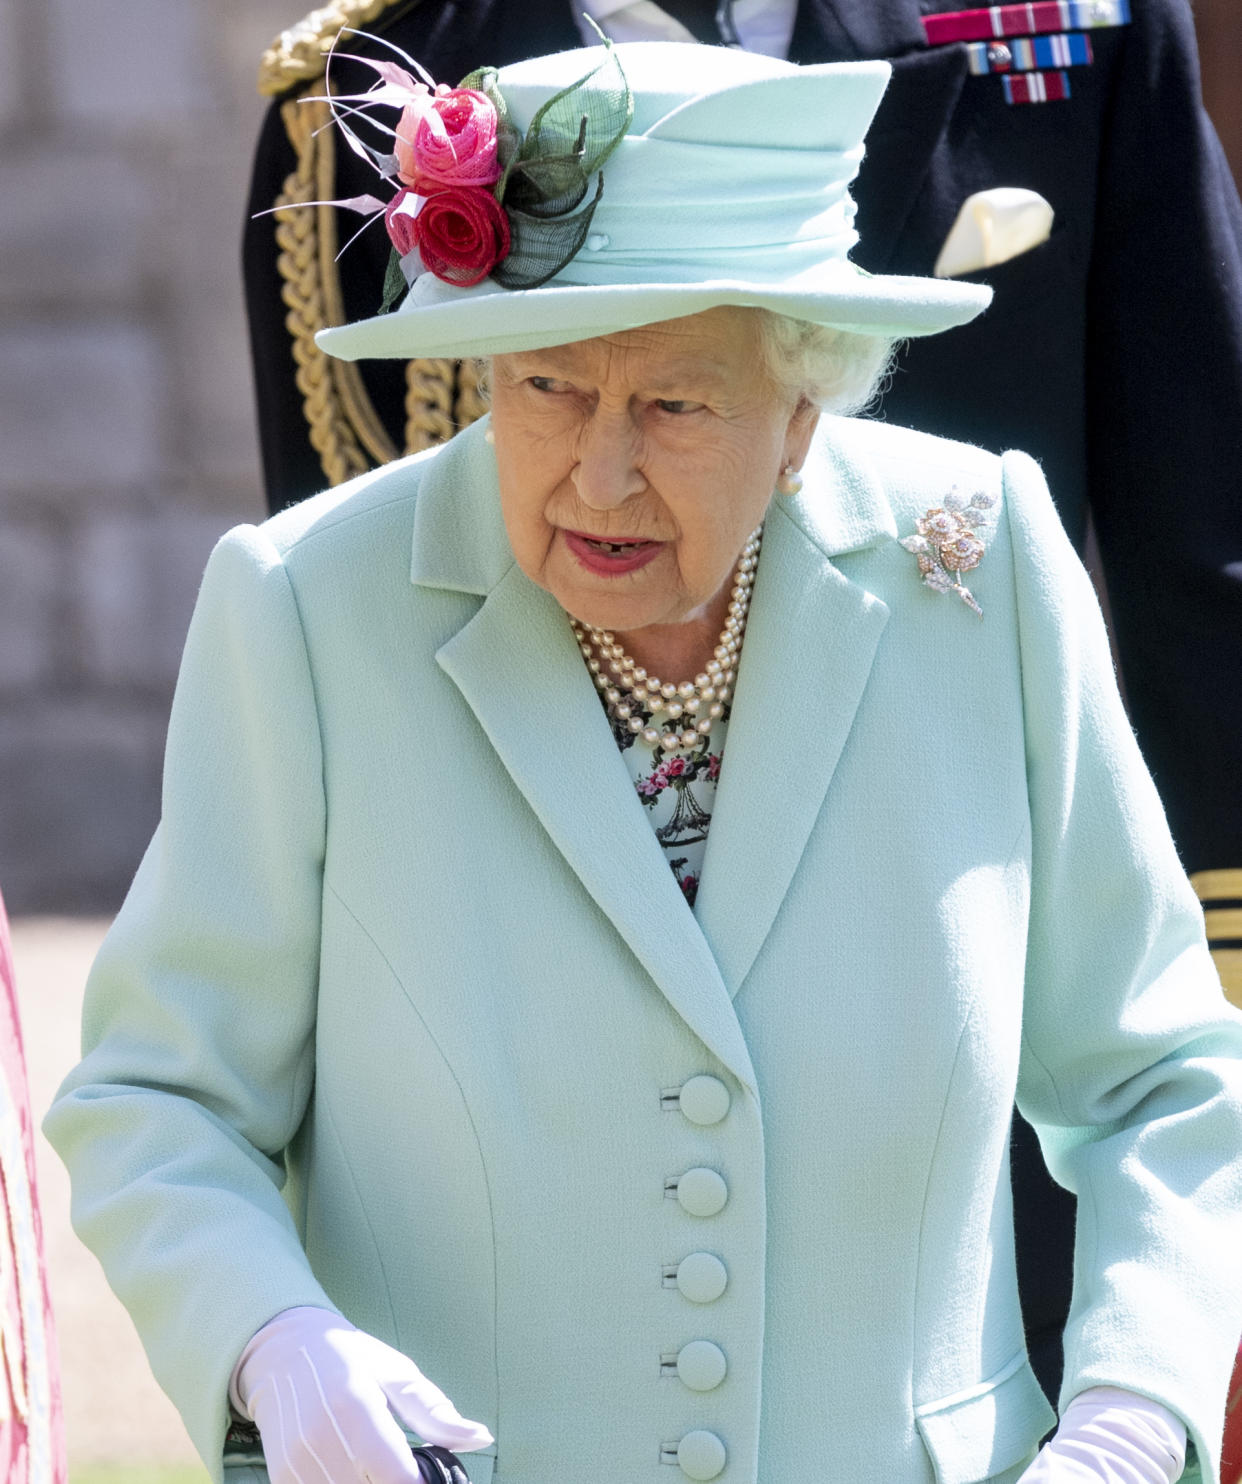 WINDSOR, ENGLAND - JULY 17: Queen Elizabeth II arrives to award Captain Sir Thomas Moore with the insignia of Knight Bachelor at Windsor Castle on July 17, 2020 in Windsor, England. British World War II veteran Captain Tom Moore raised over £32 million for the NHS during the coronavirus pandemic. (Photo by UK Press Pool/UK Press via Getty Images)